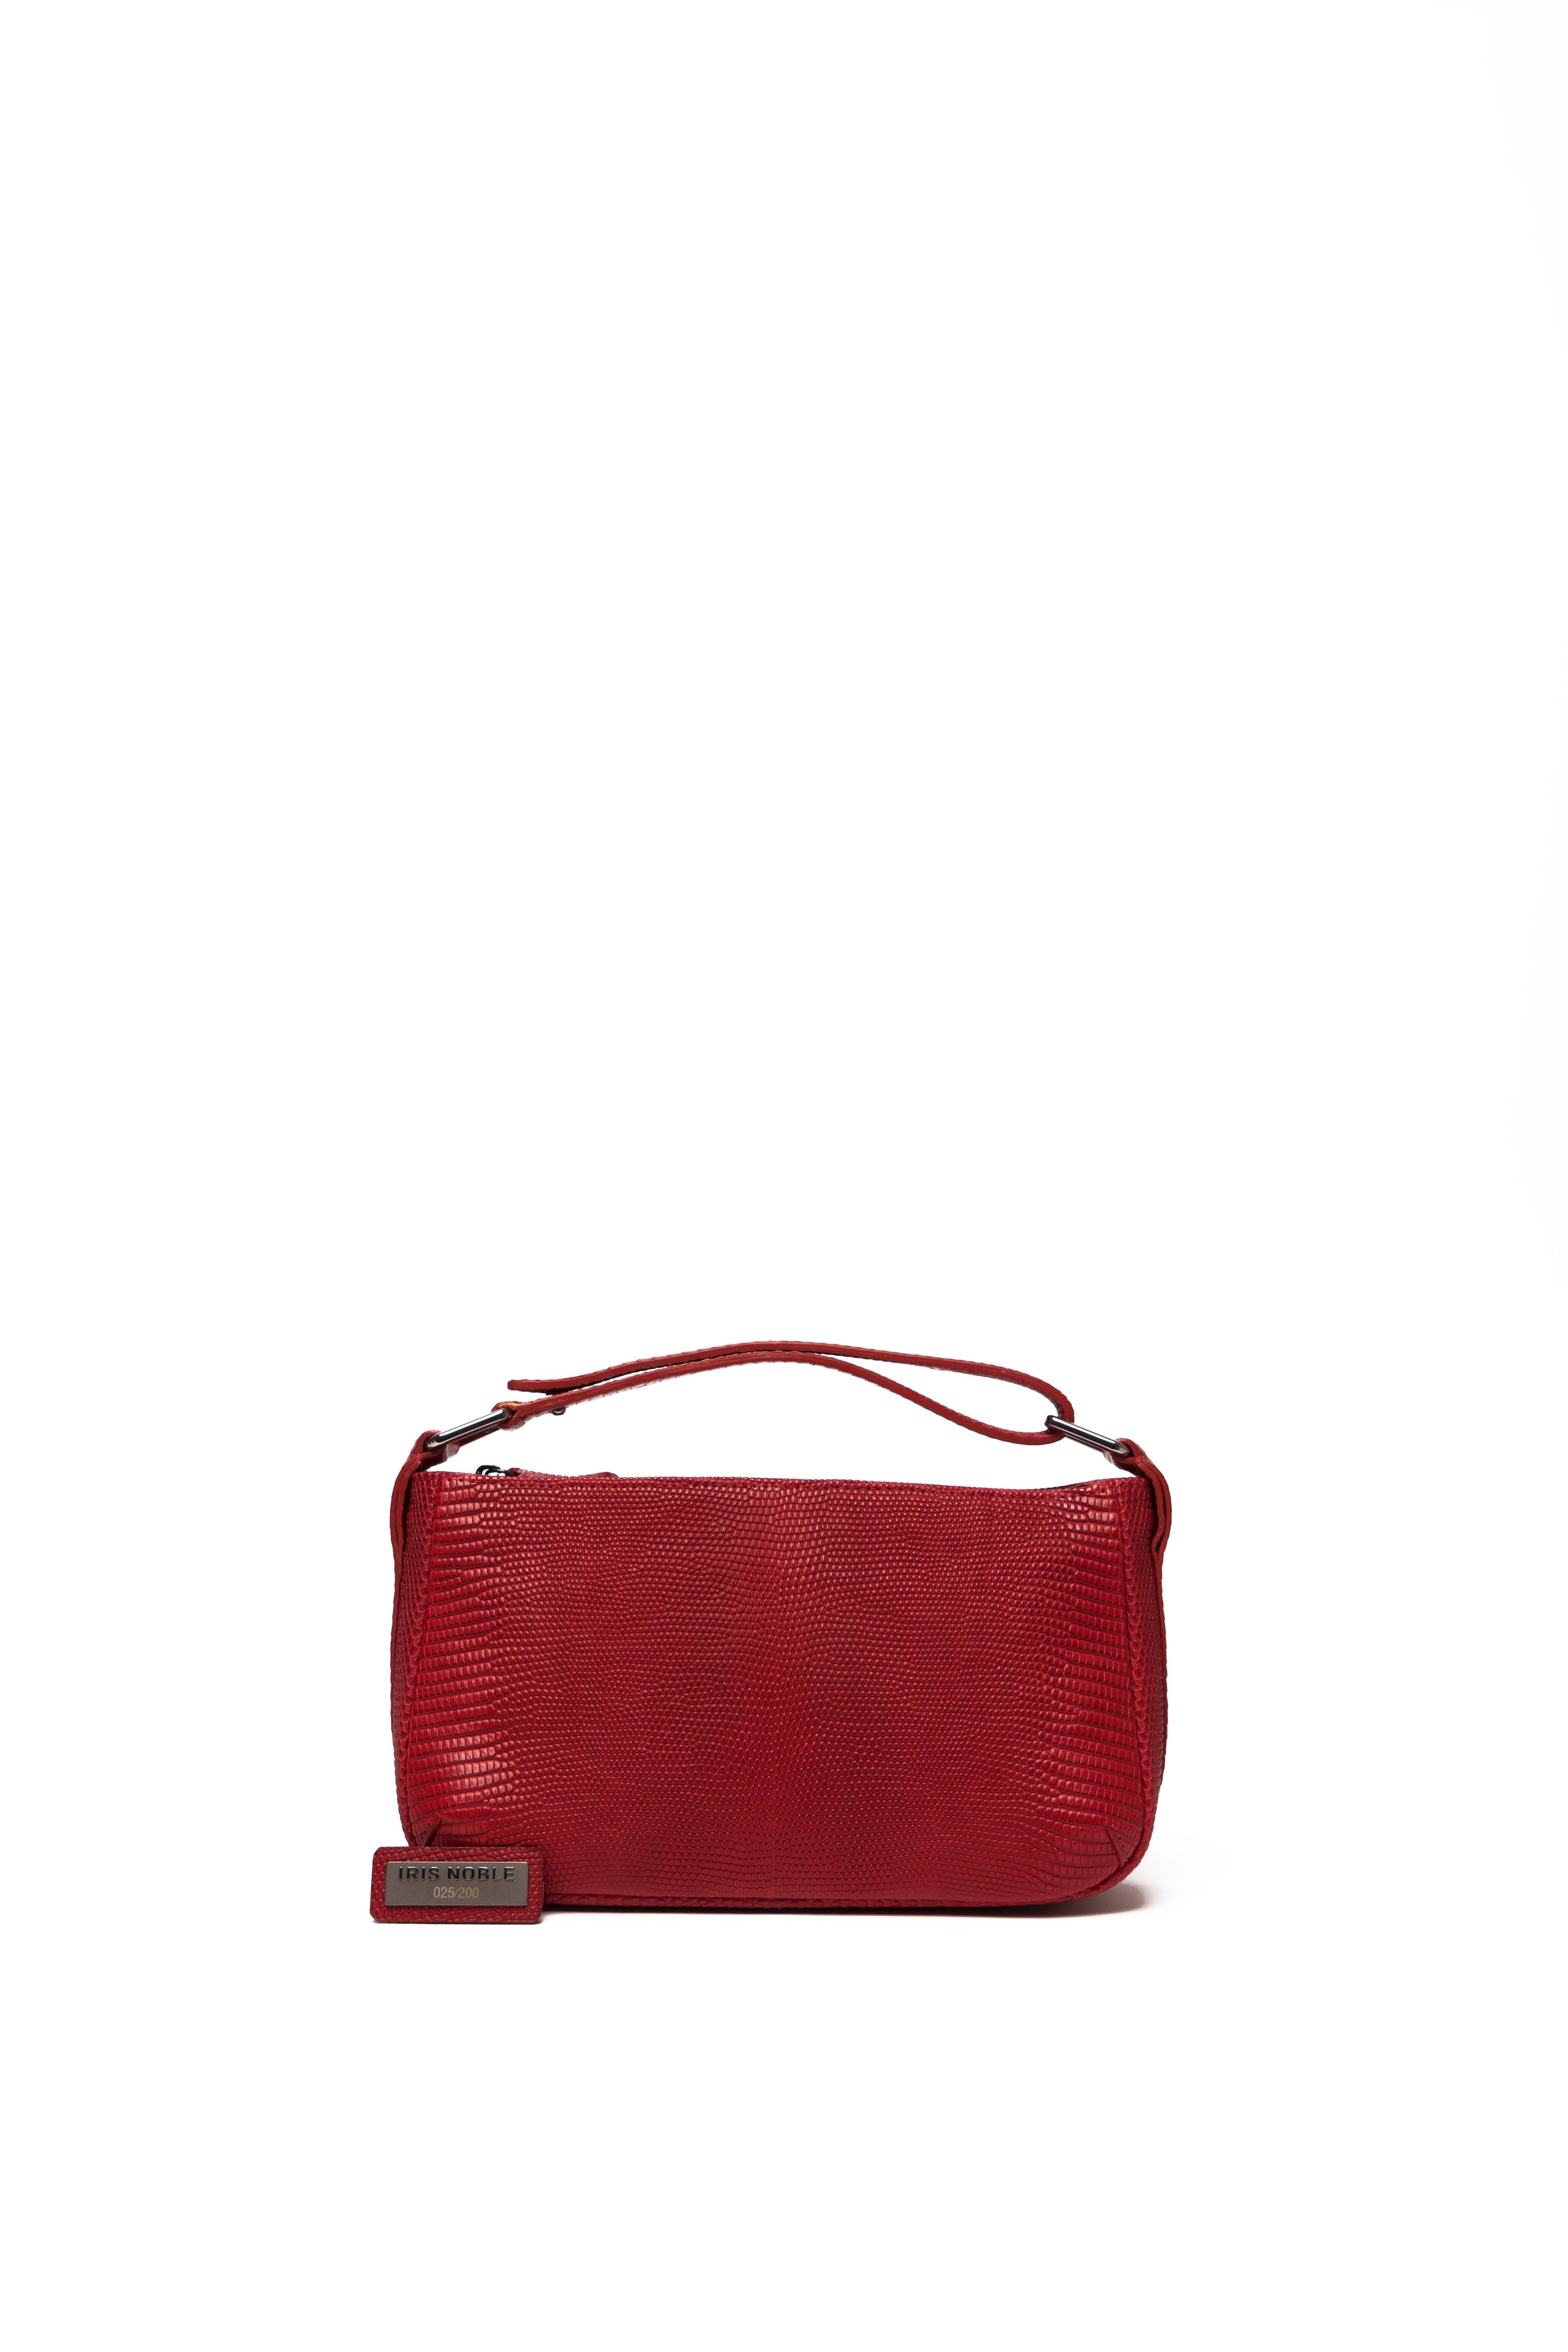 Lynn Baguette Red Lizard Leather Handbag In New Condition For Sale In Paris, FR